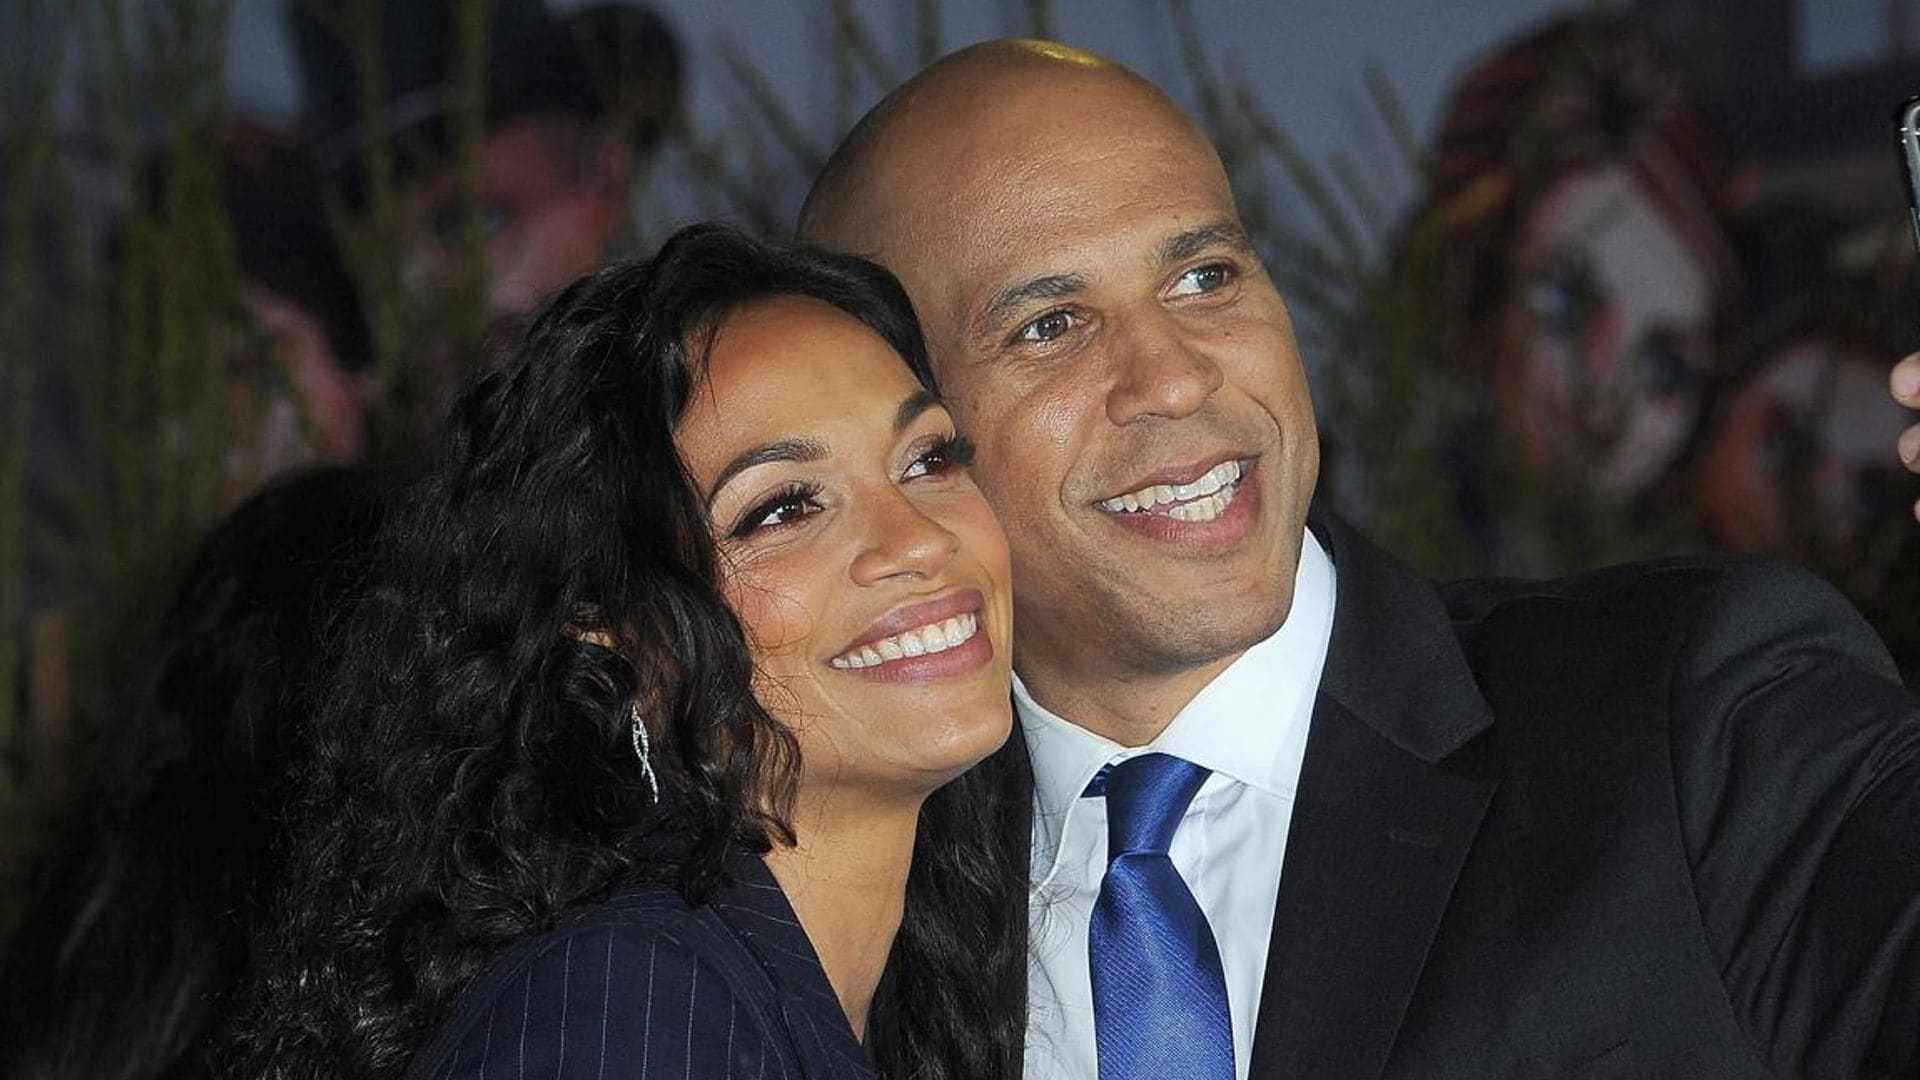 Rosario Dawson smooches Cory Booker during rare red carpet appearance